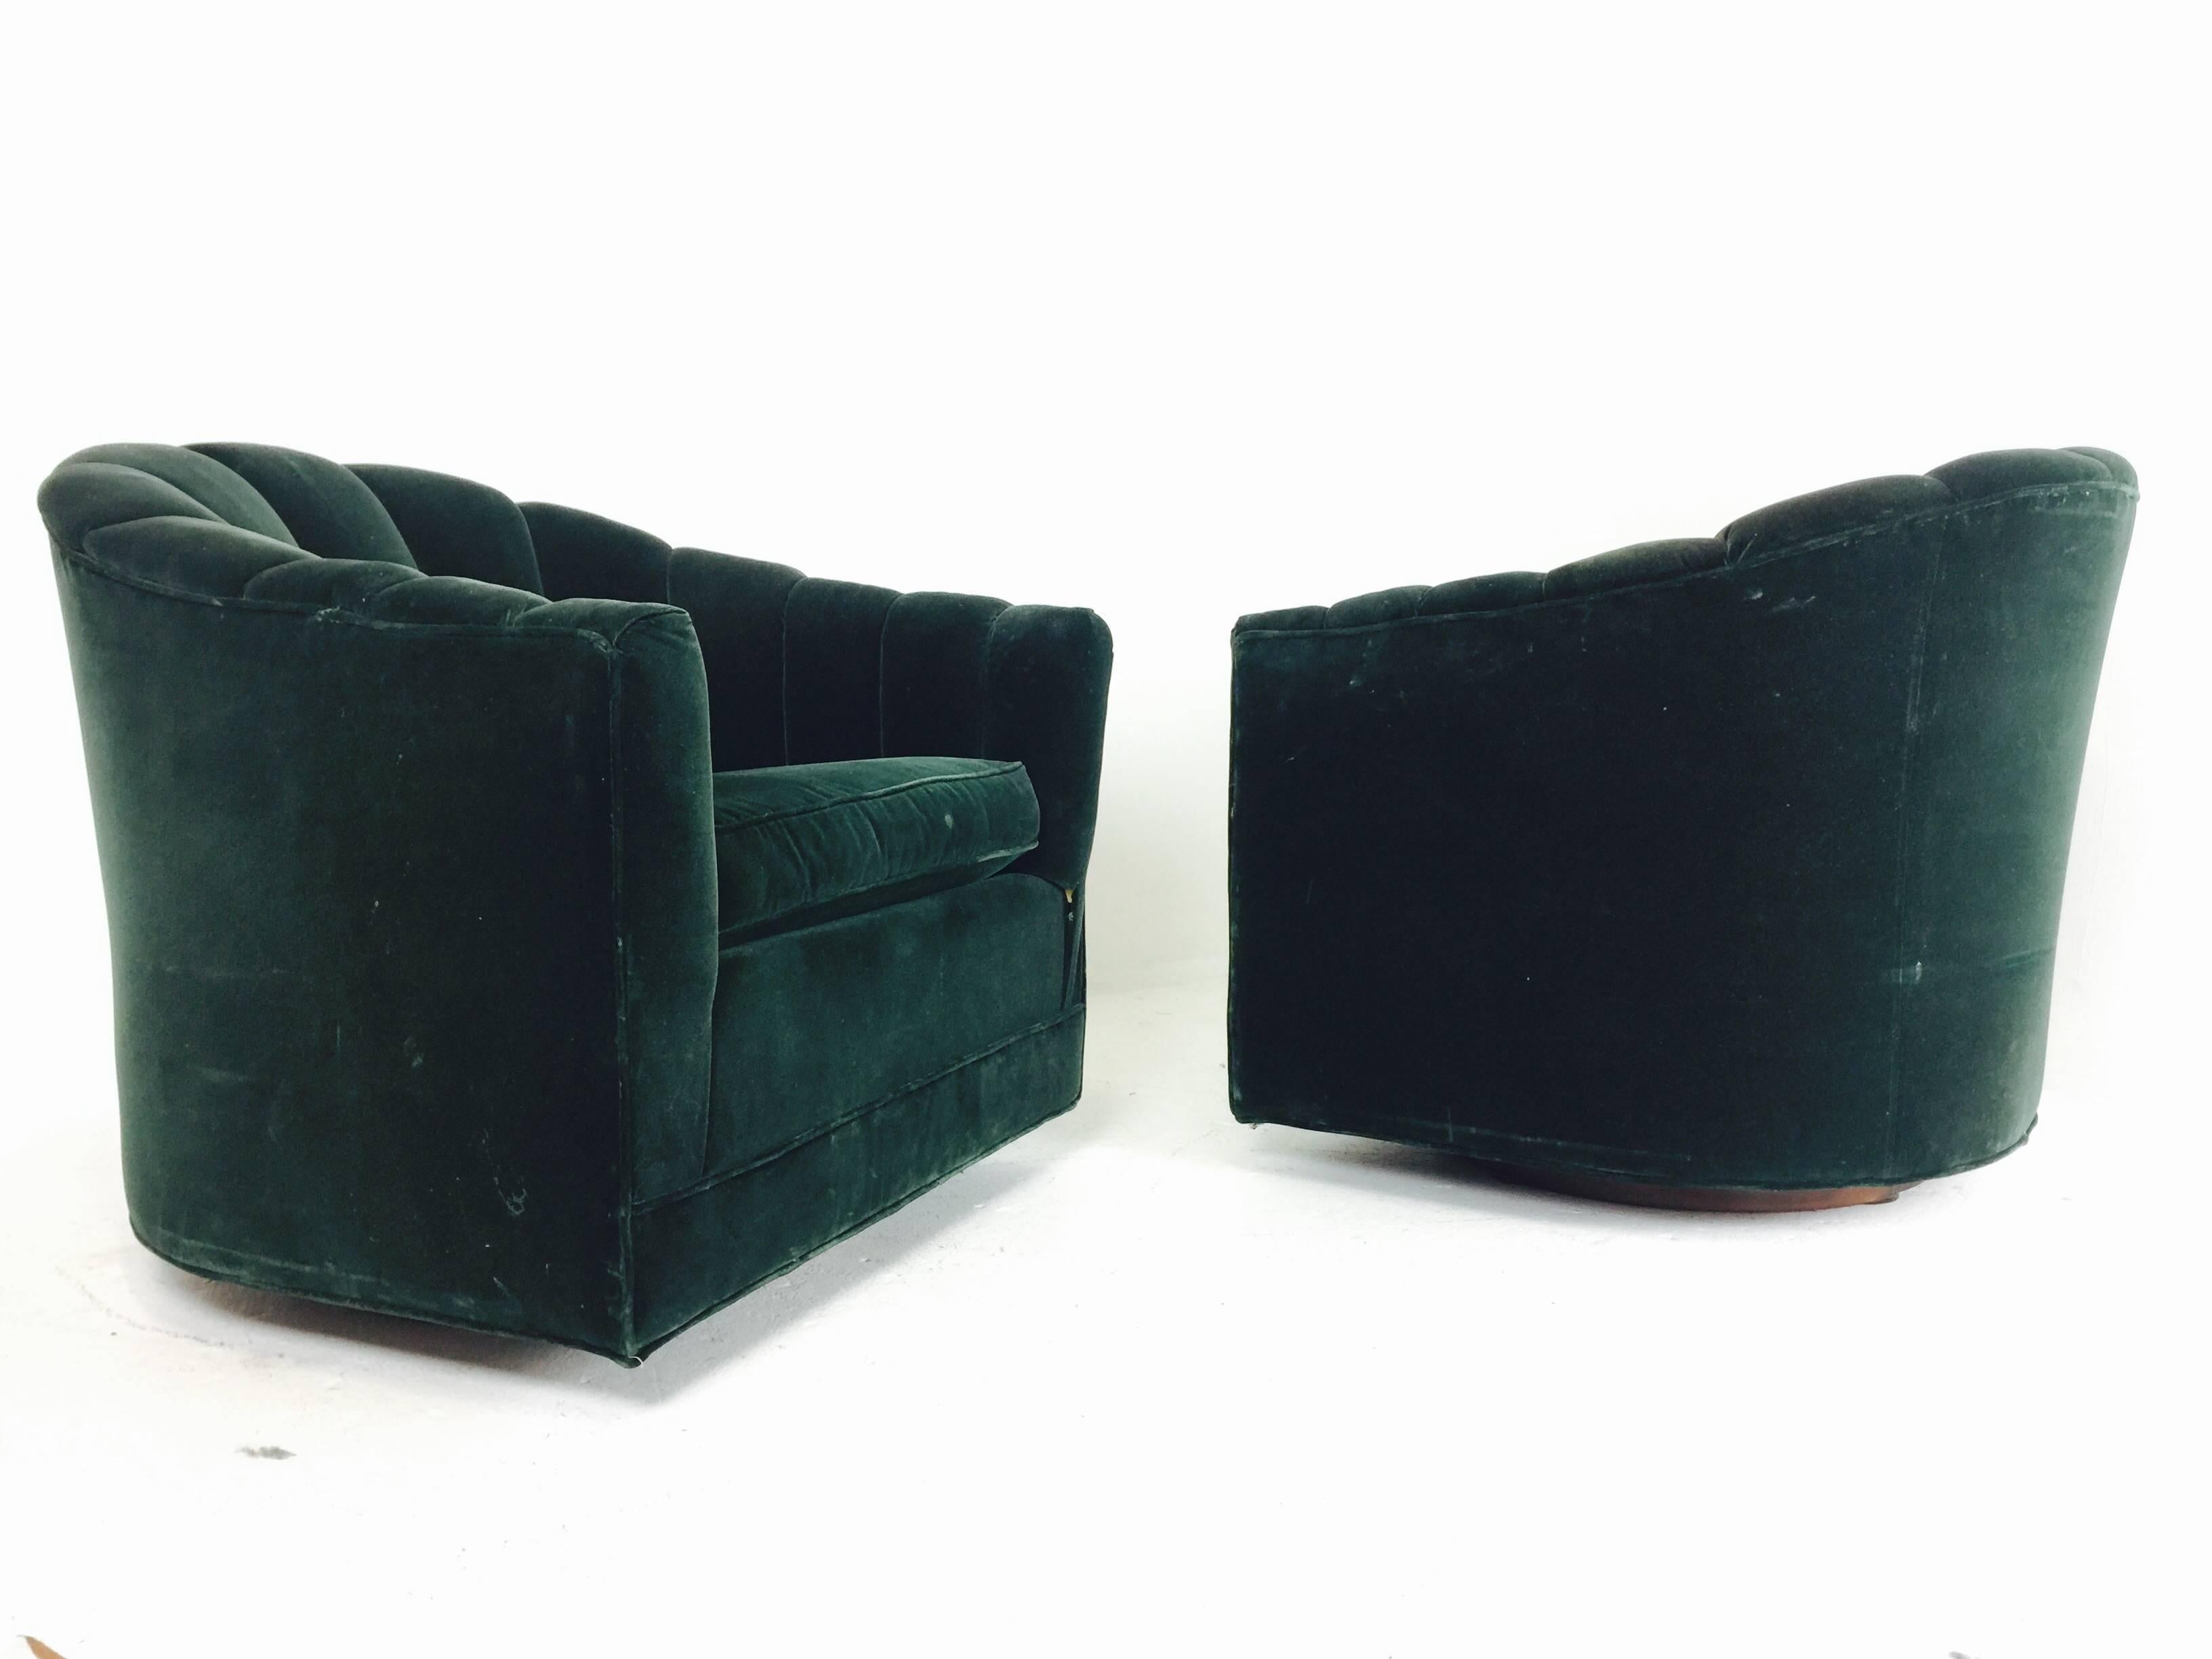 Pair of hunter green velvet channel back Milo Baughman swivel chairs. In good vintage condition with wear do to age. New upholstery recommended, circa 1960s.

Dimensions: 31